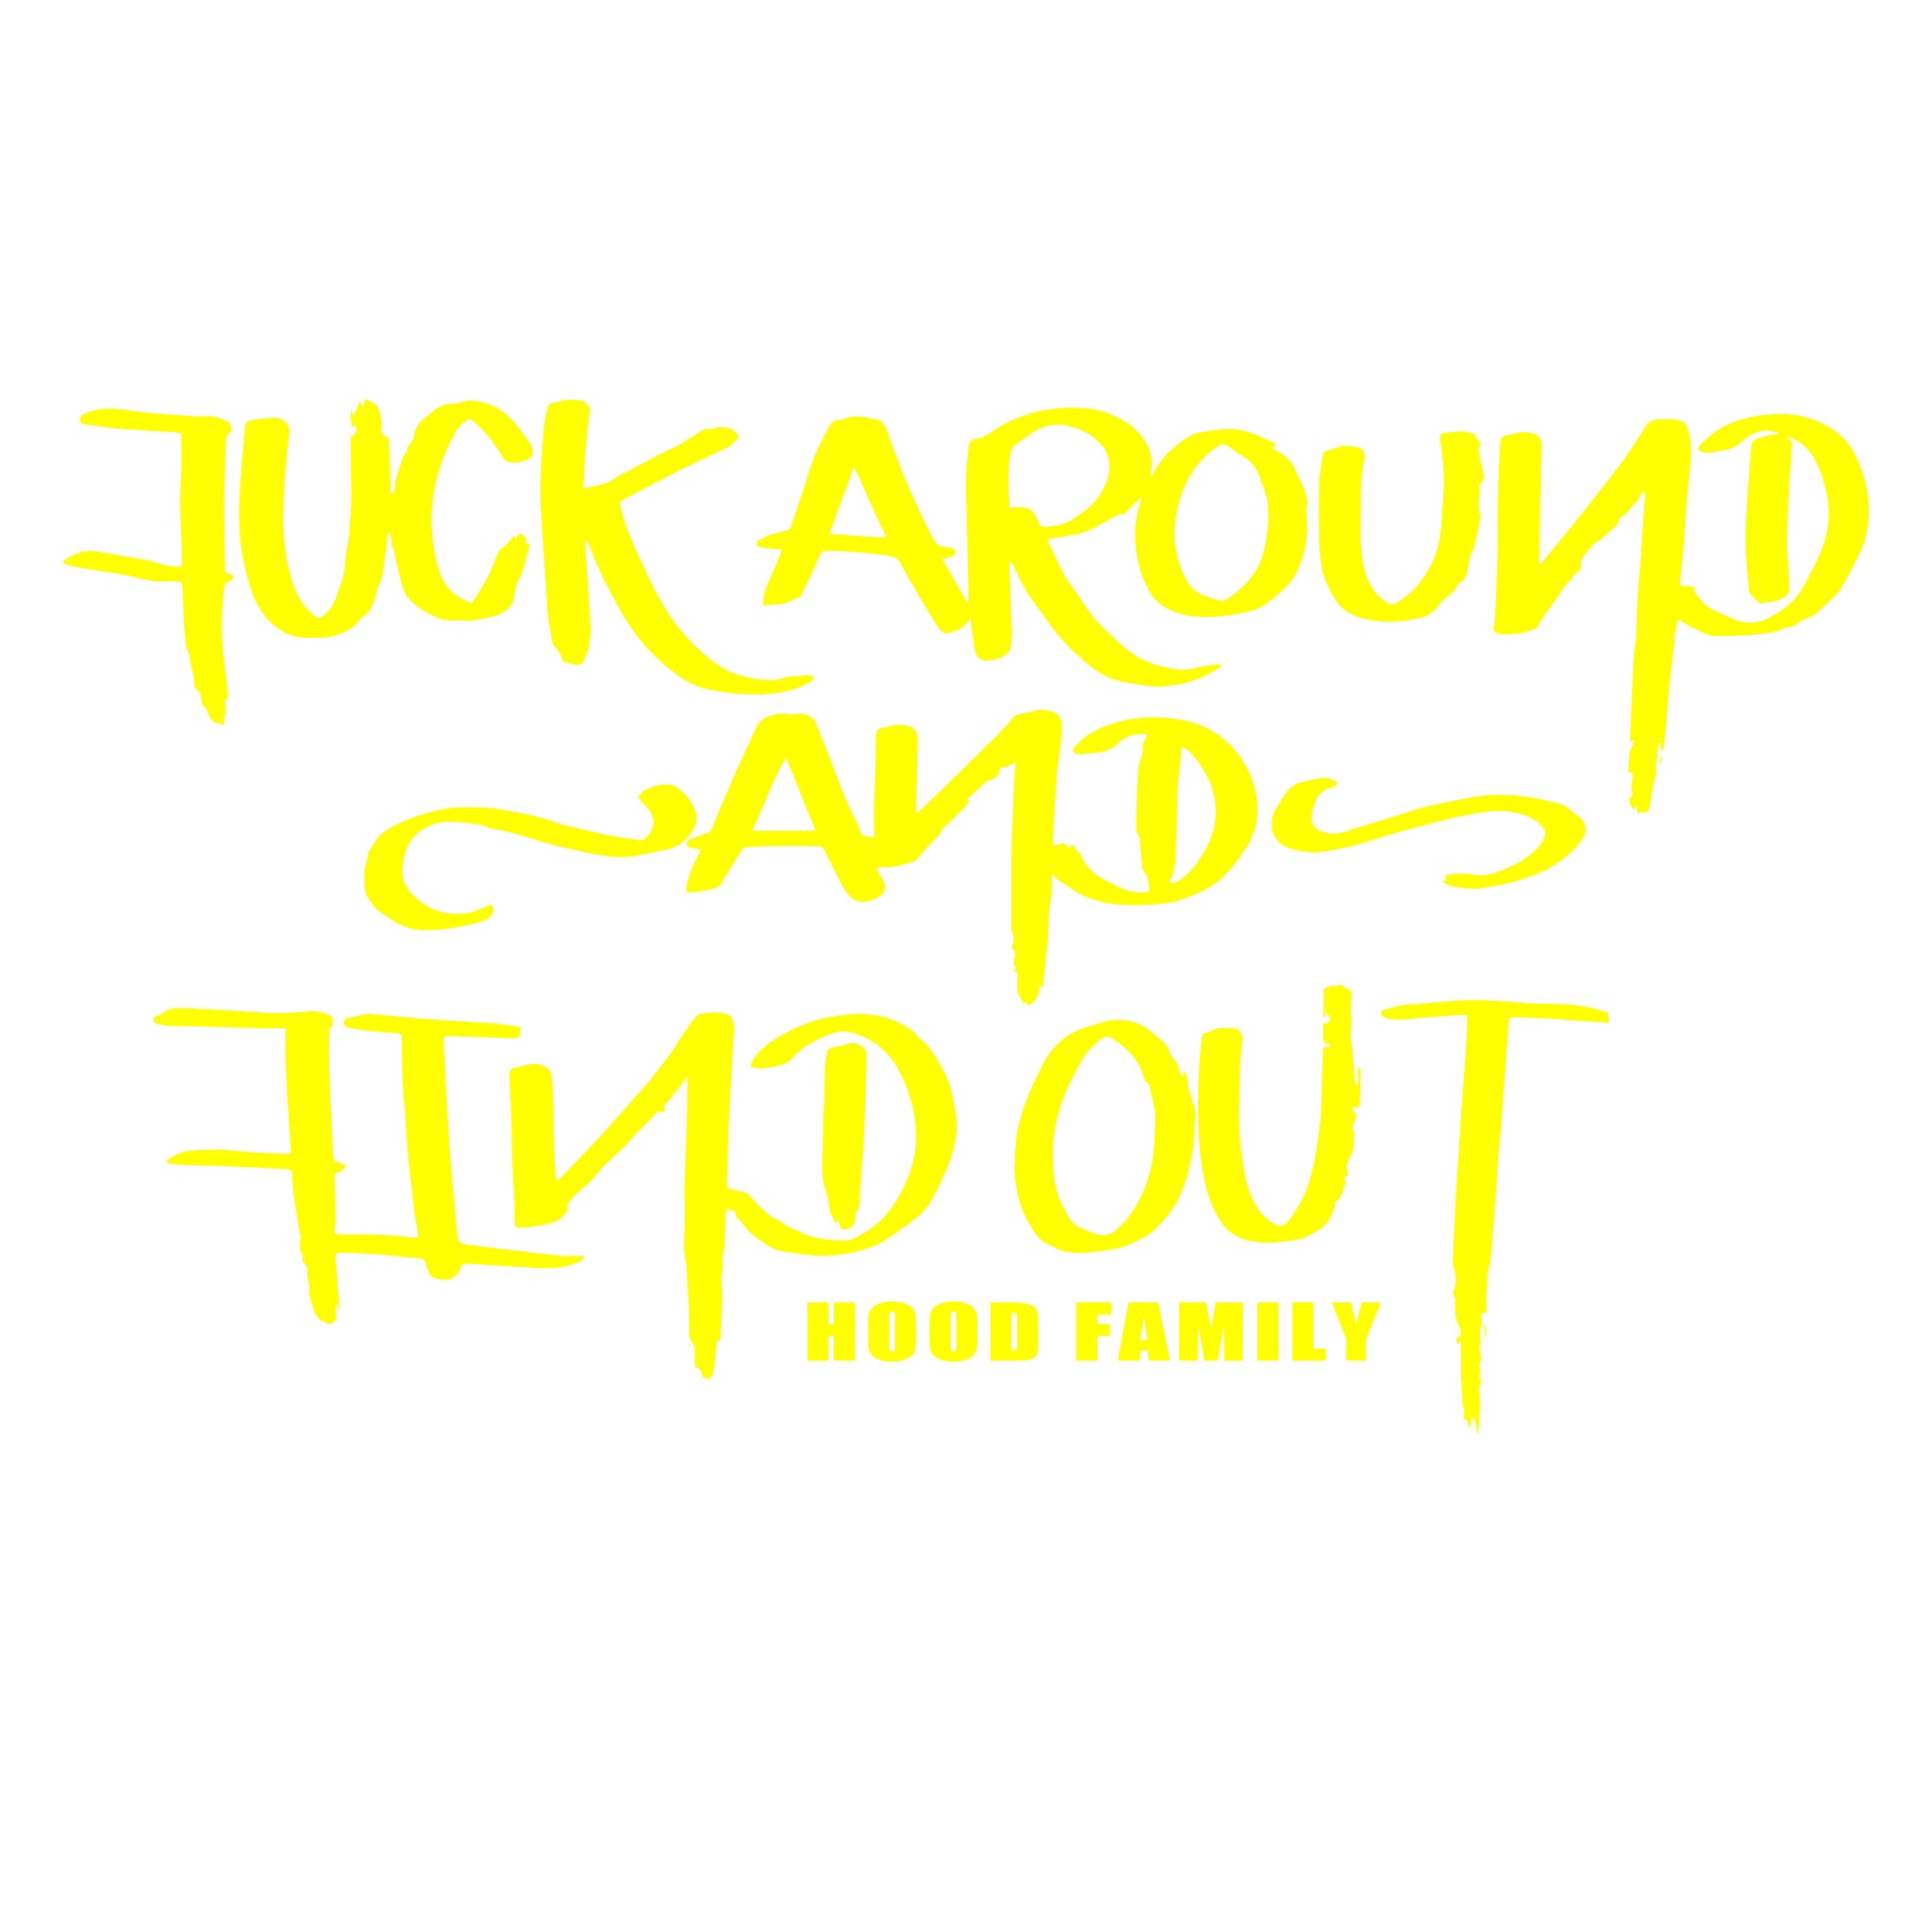 Fuck Around and Find Out Vinyl Bumper Sticker Political Sticker FREE  SHIPPING 